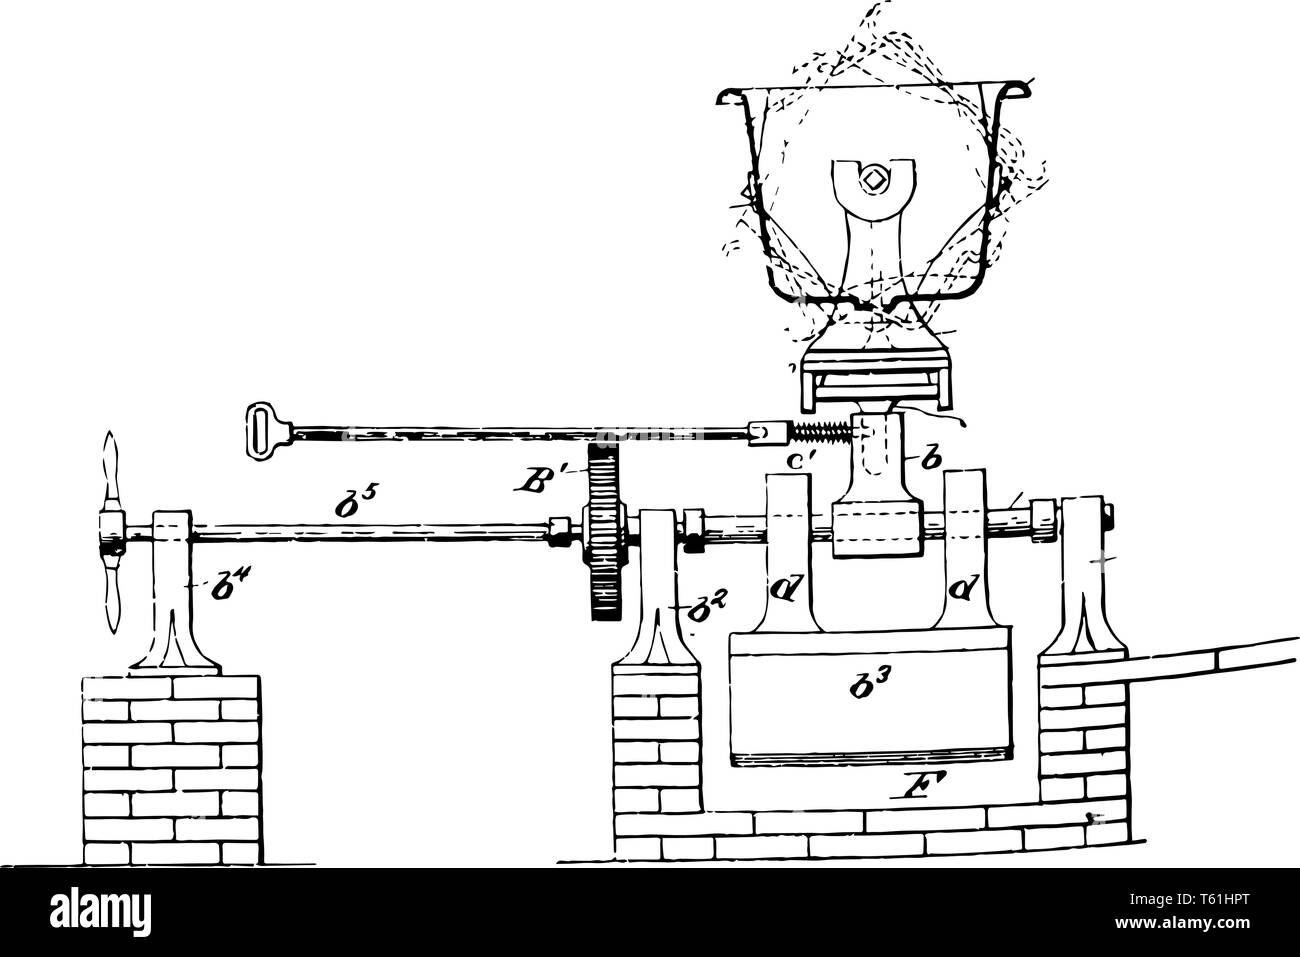 This illustration represents Reversible Enameling Cradle which used to decorate glass vessels during the Roman period vintage line drawing or engravin Stock Vector